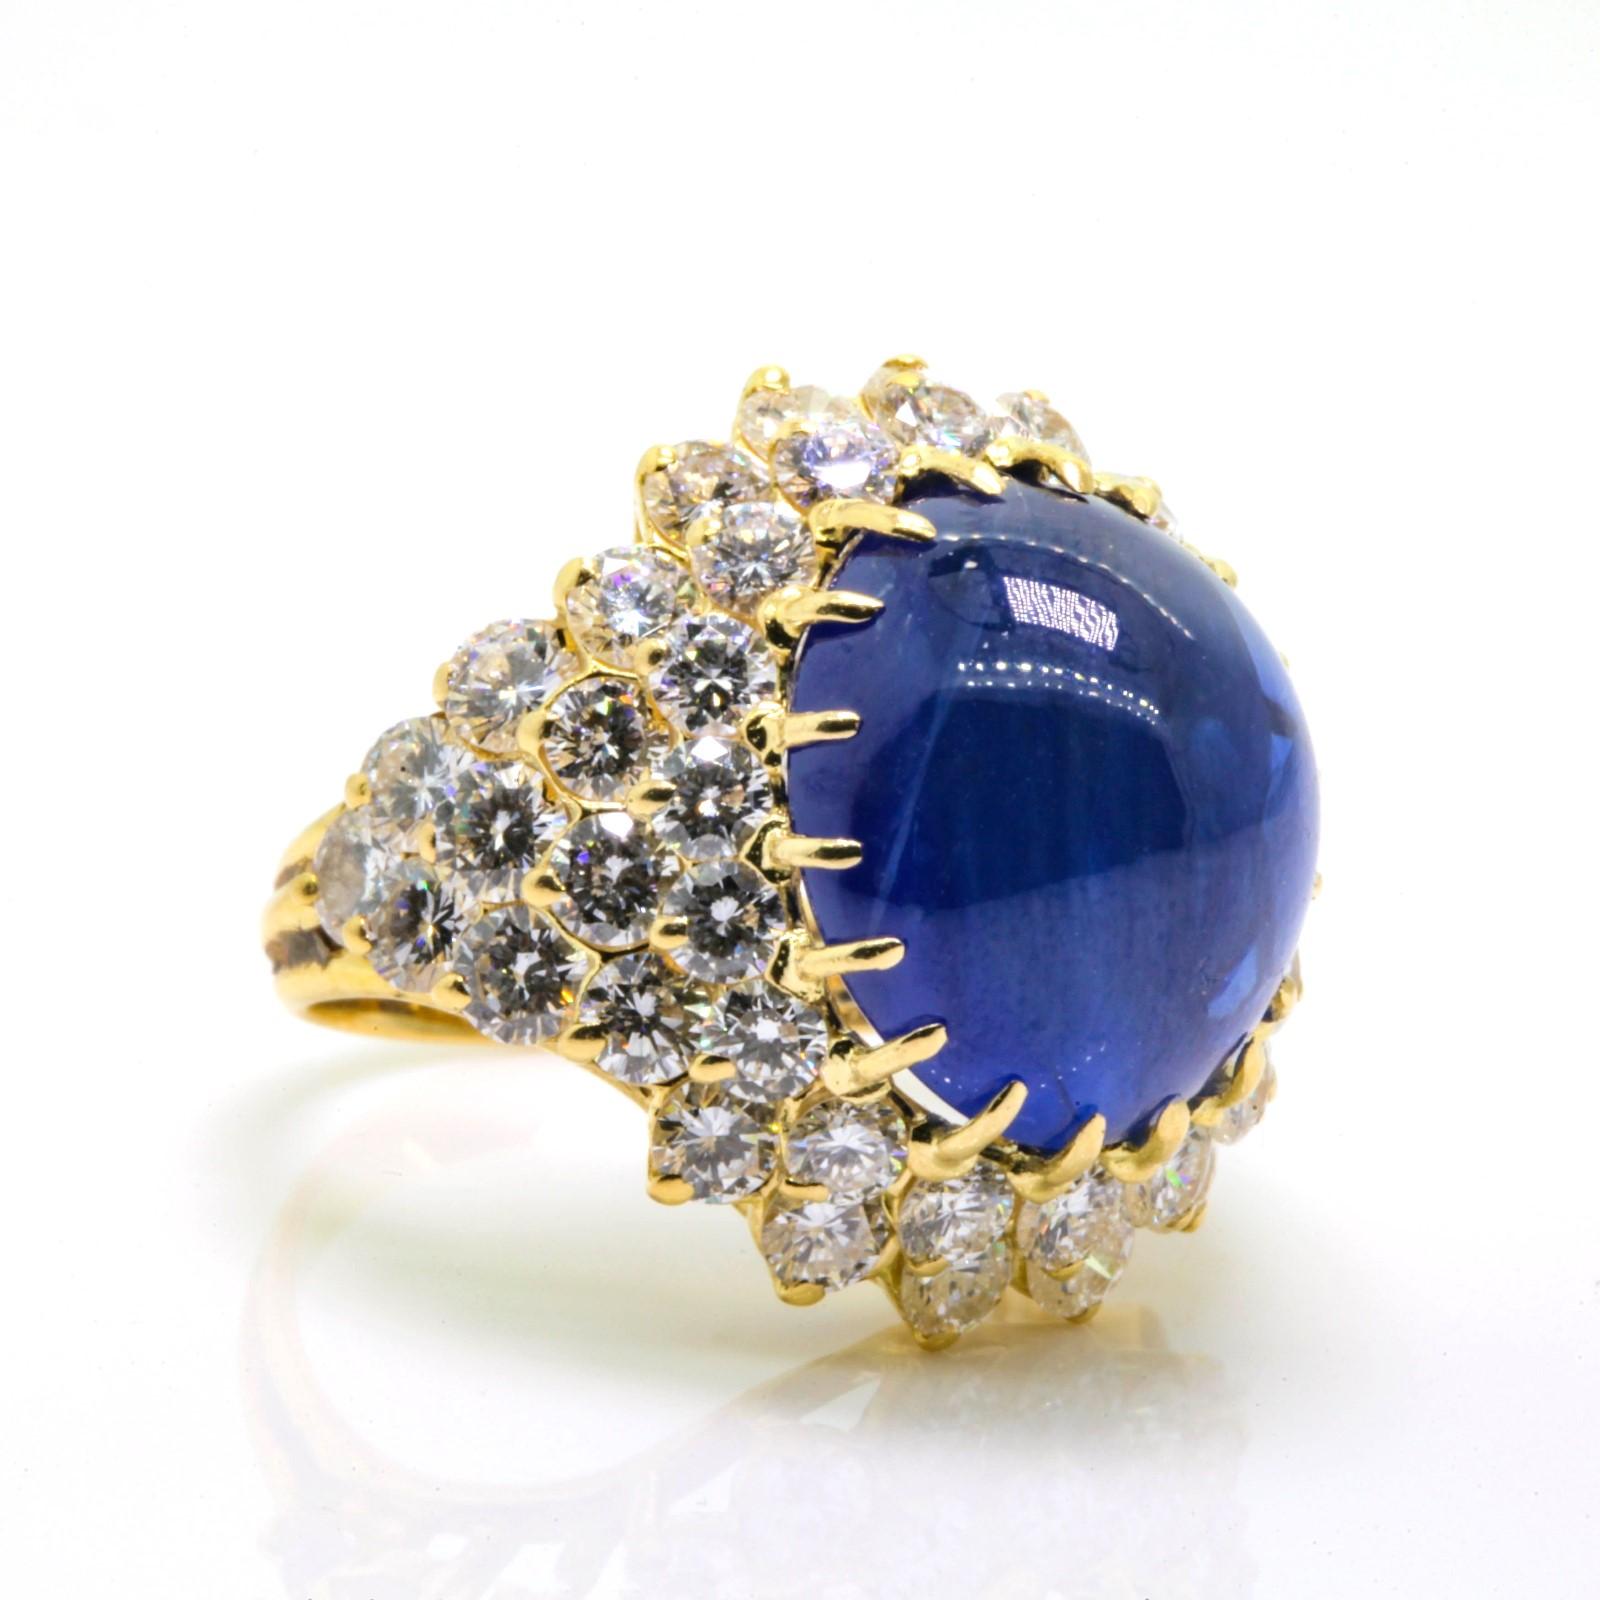 Ostentatiously perfect!   Beautifully made 18KT gold ring flaunting a 15.74 carat luminous cabochon cut Ceylon Sapphire, surrounded by 5.75 carats of shimmering  Round Brilliant Diamonds of G/H color - VS clarity.  Ring size 6.5 Circa 1970s 